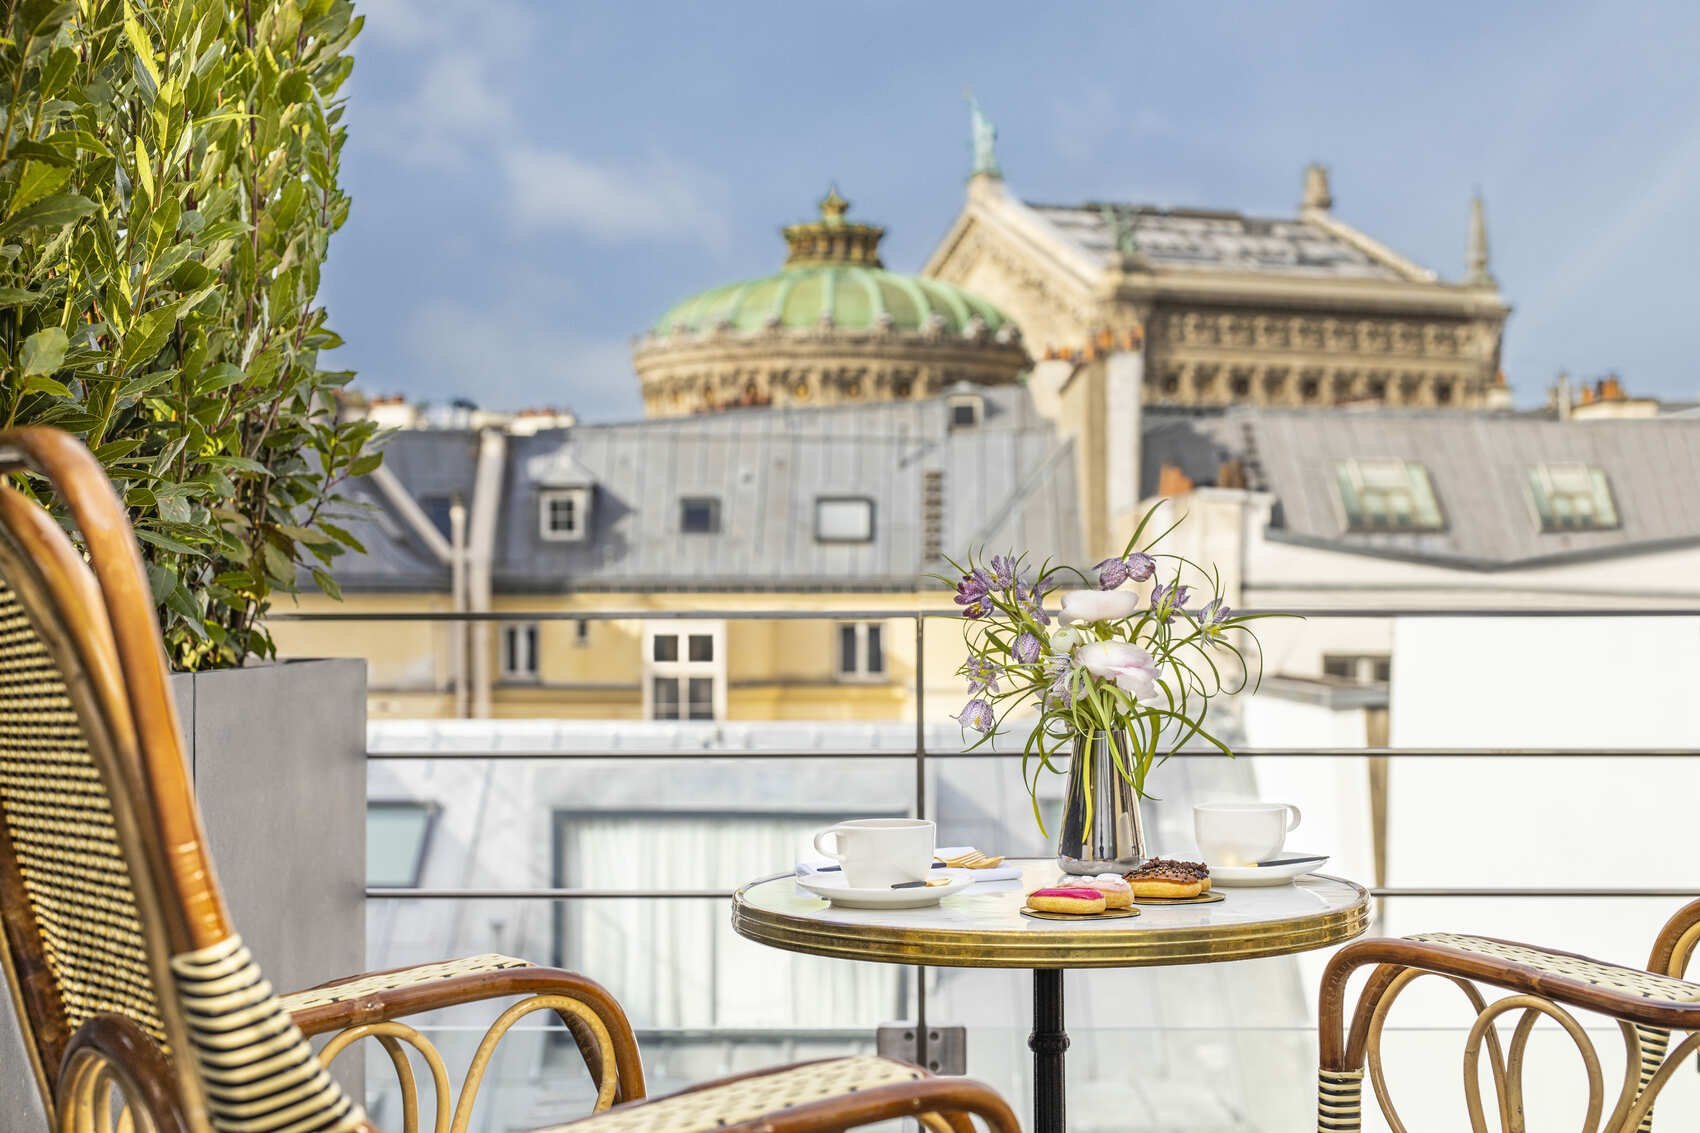 Luxury boutique hotel - Maison Albar Hotels Le Vendome 5 stars - hotel with view on Paris roofs